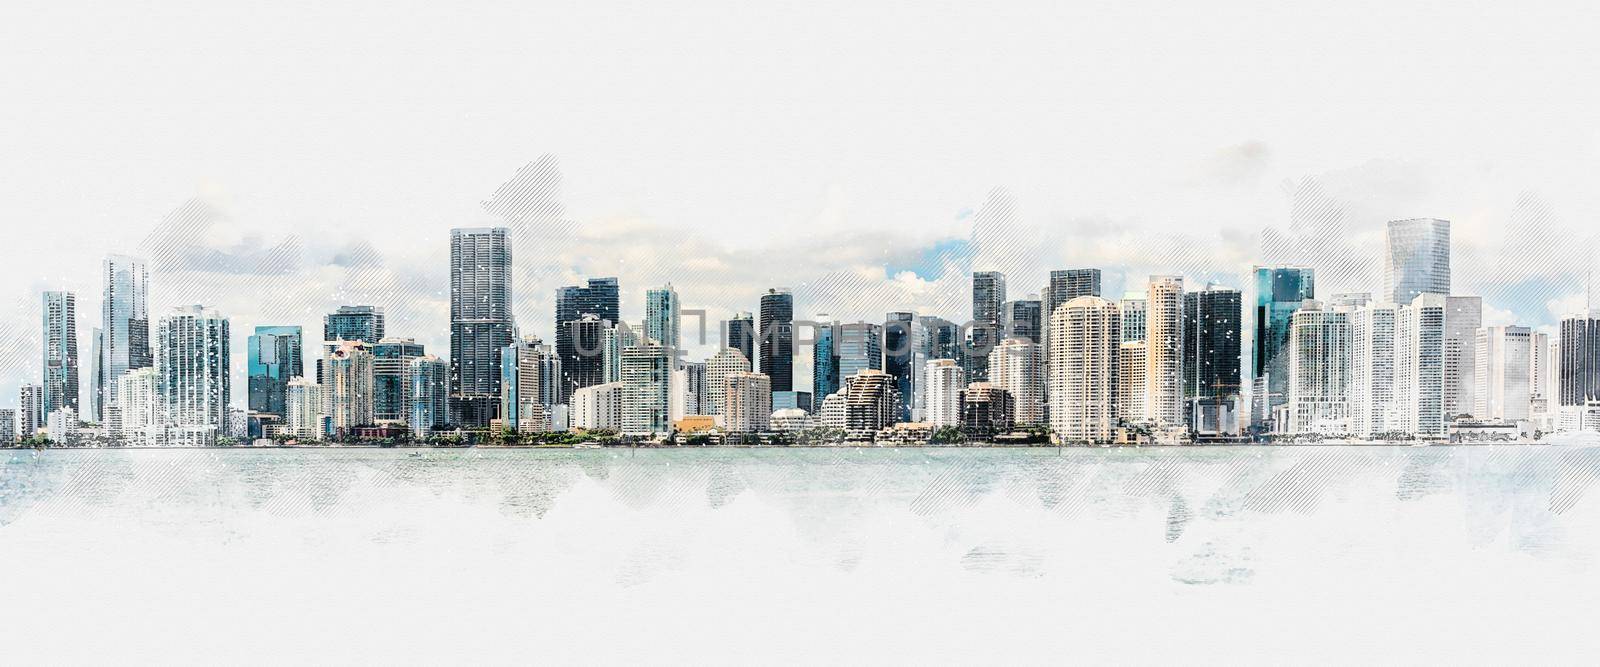 Digital watercolor painting of Miami skyline with many skyscrapers